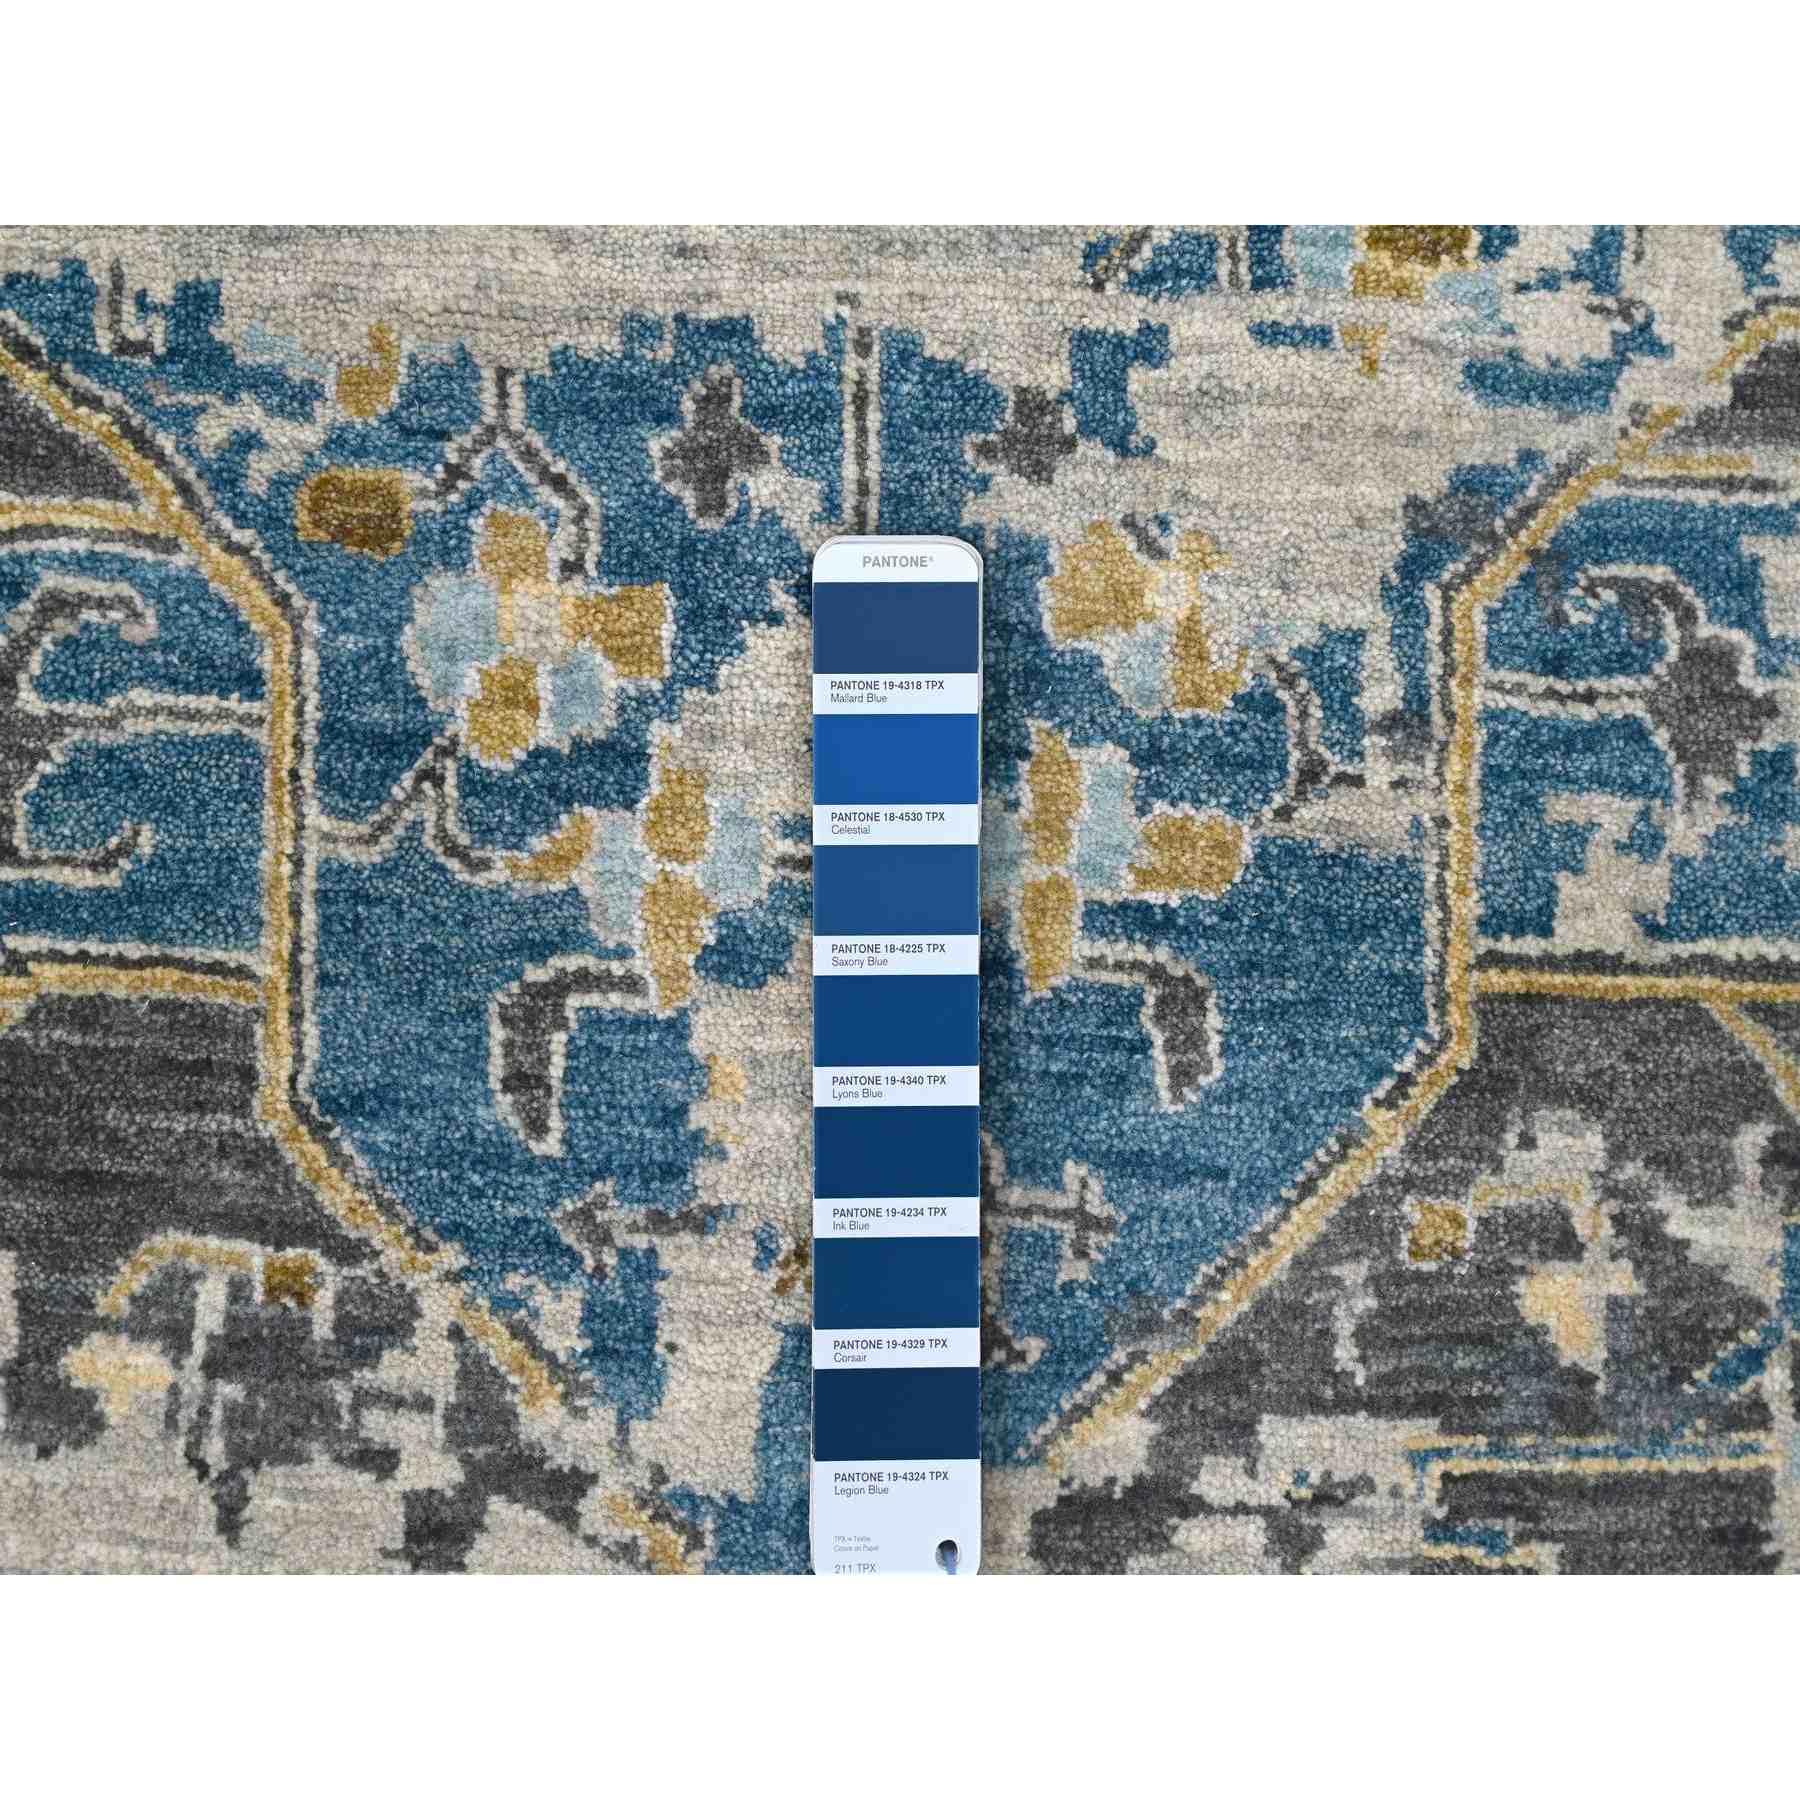 Transitional-Hand-Knotted-Rug-420640